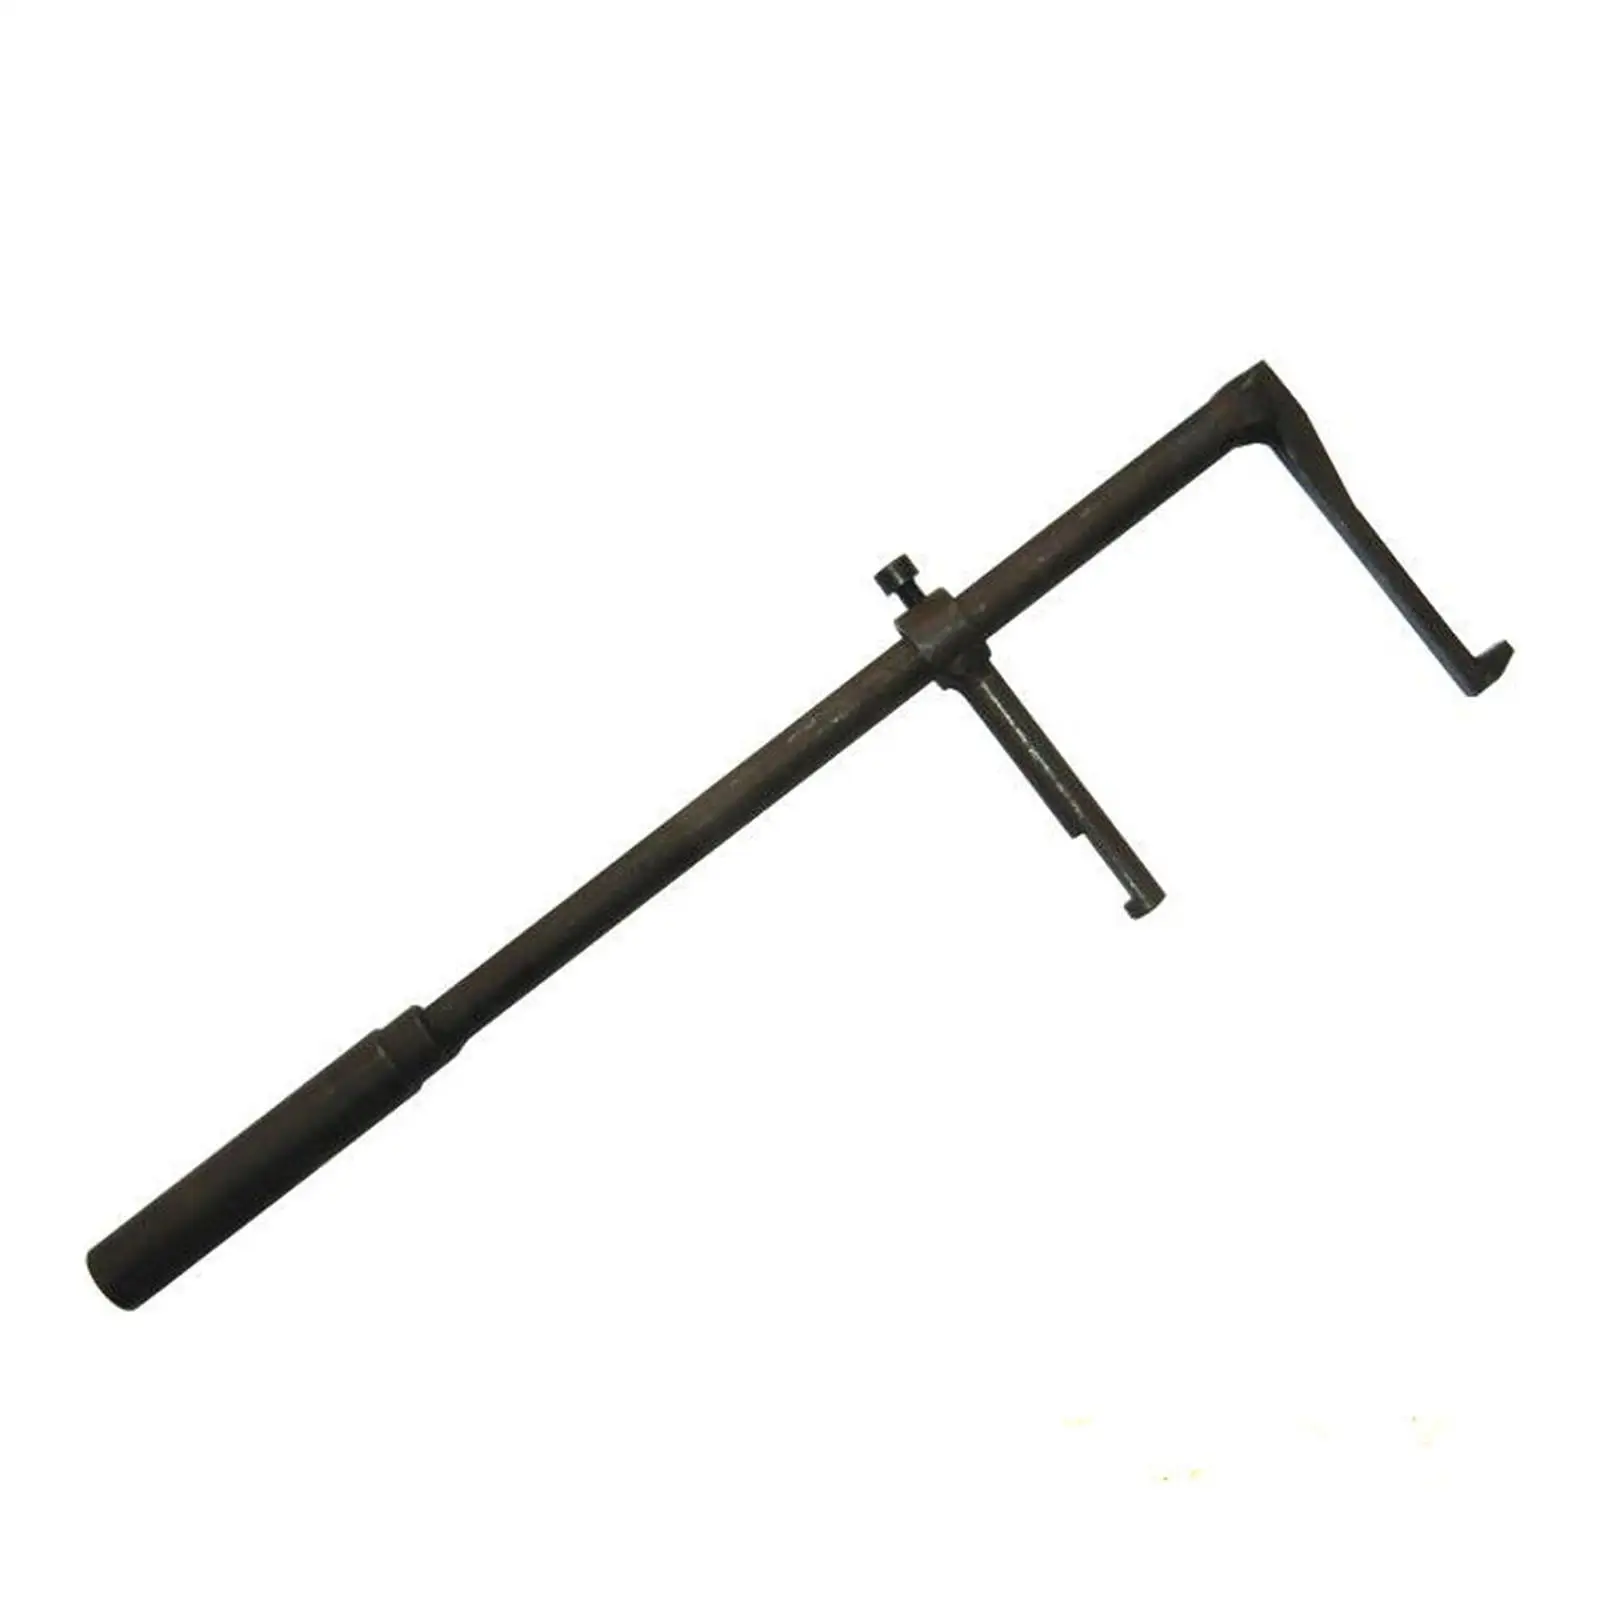 Front Fork Oil Seal Puller Remover, O Sealing Ring Puller Repair Tool, Install Tool for Motorcycle